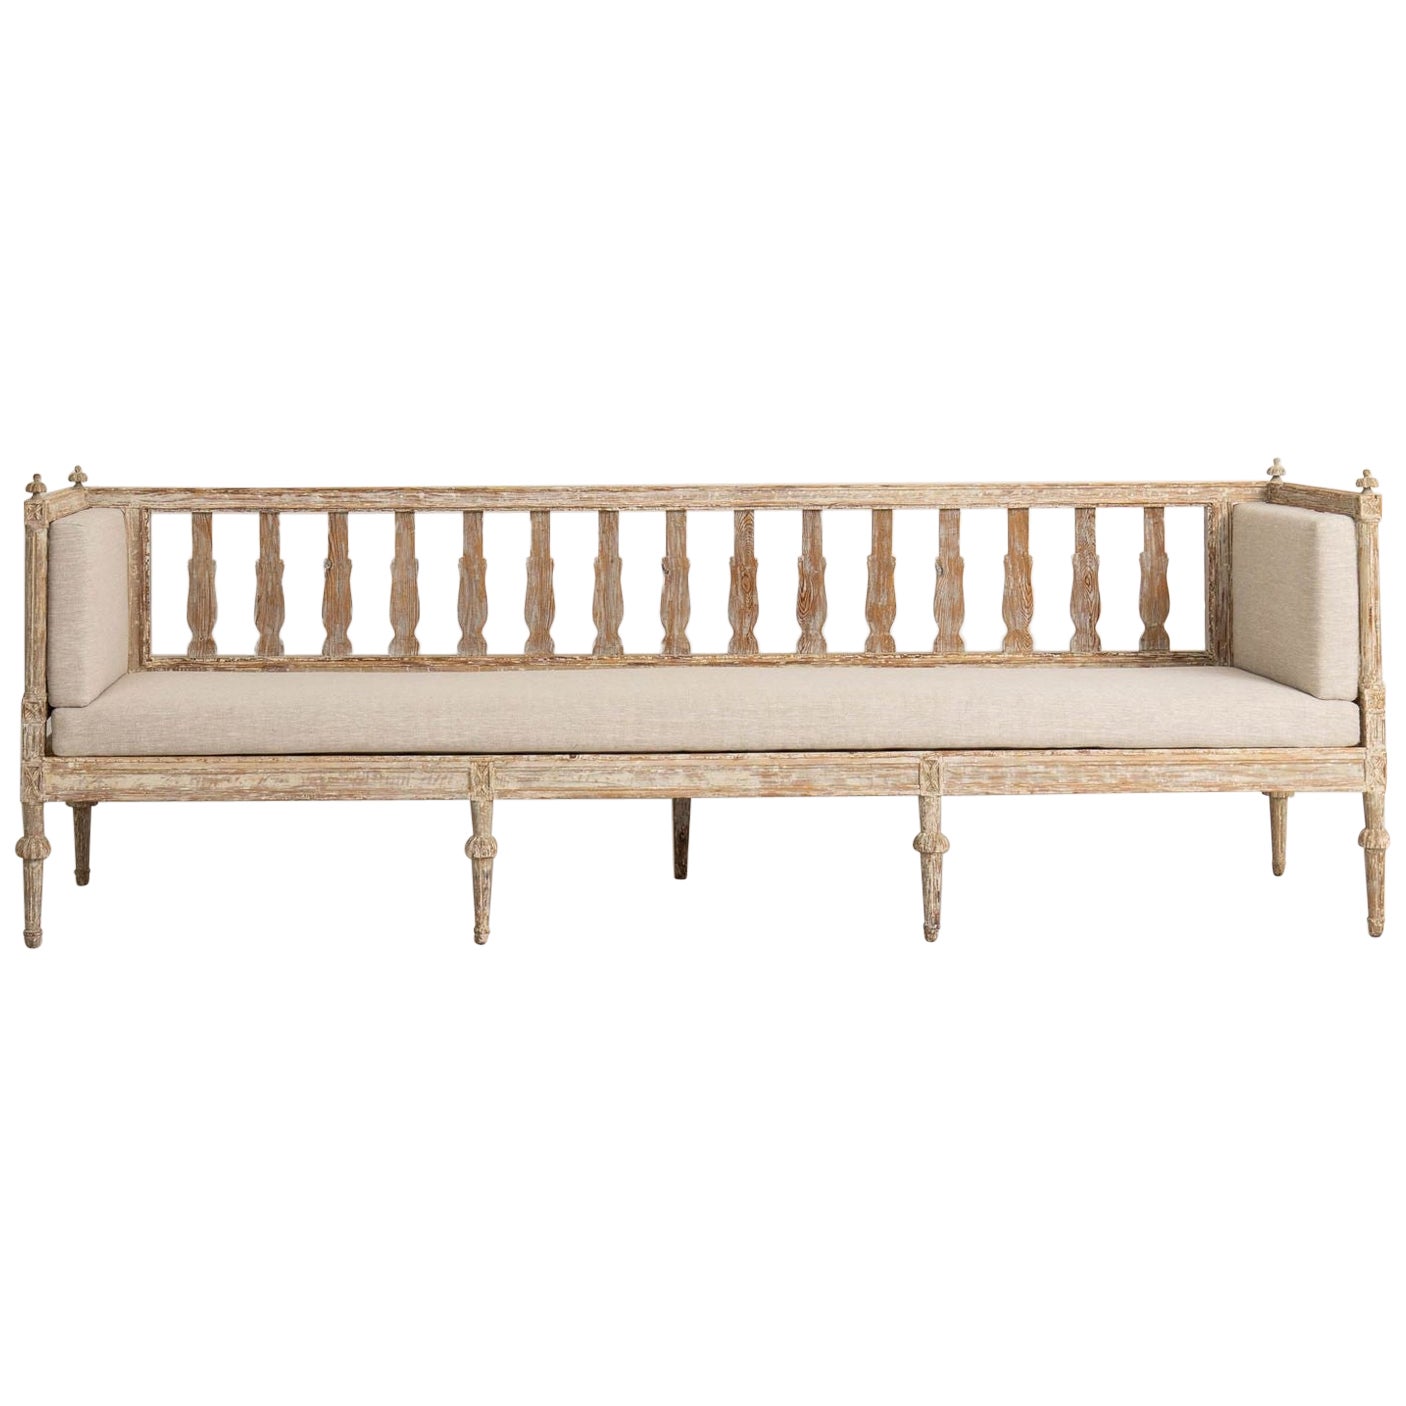 19th c. Swedish Gustavian Period Sofa Bench in Original Paint For Sale